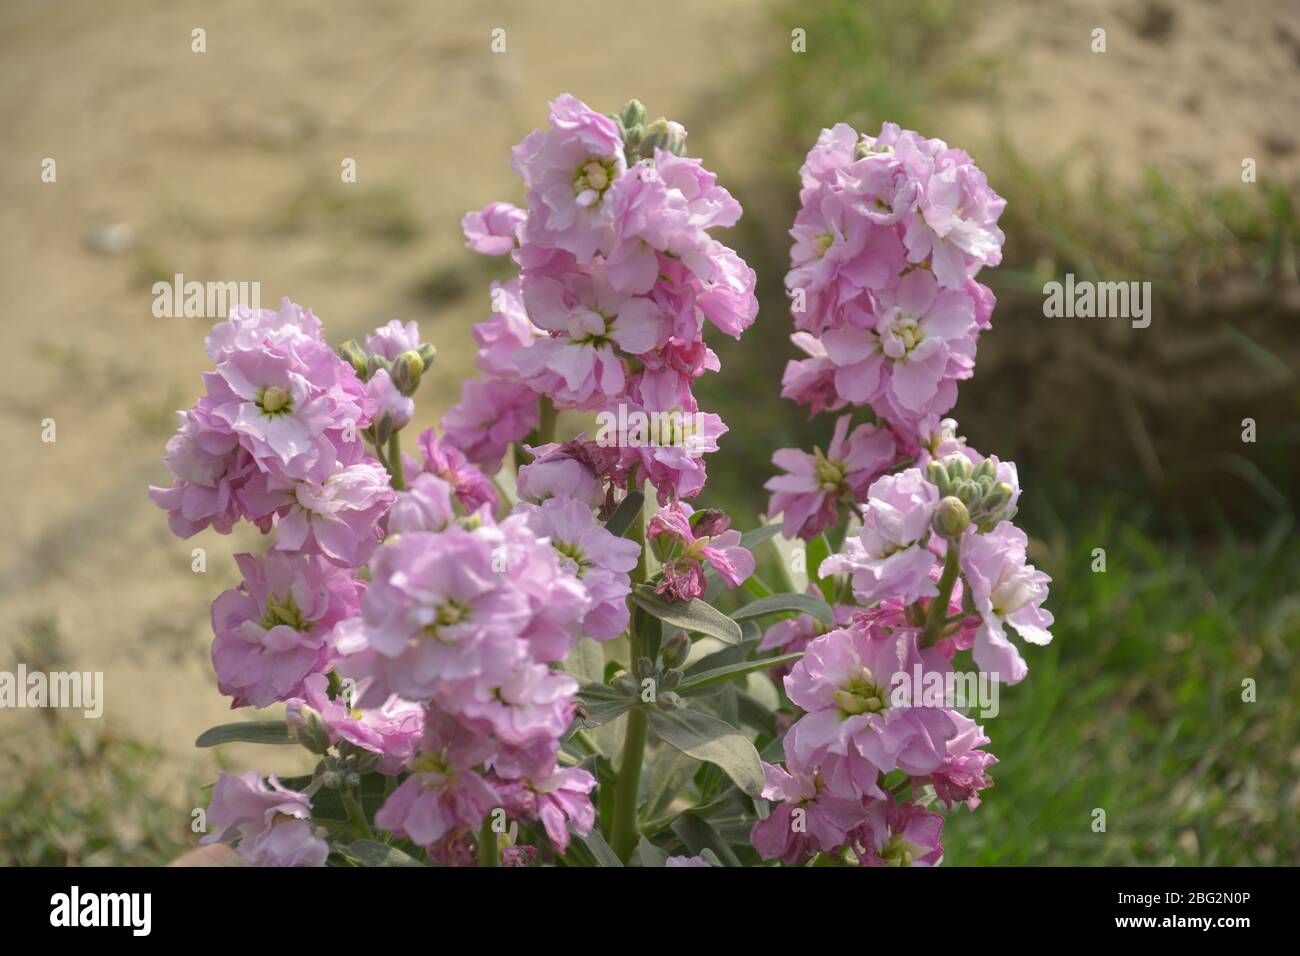 Close up of purple color stock flowers, scientifically known as matthiola incana, common name “night-scented stock” or  “evening-scented stock” Stock Photo